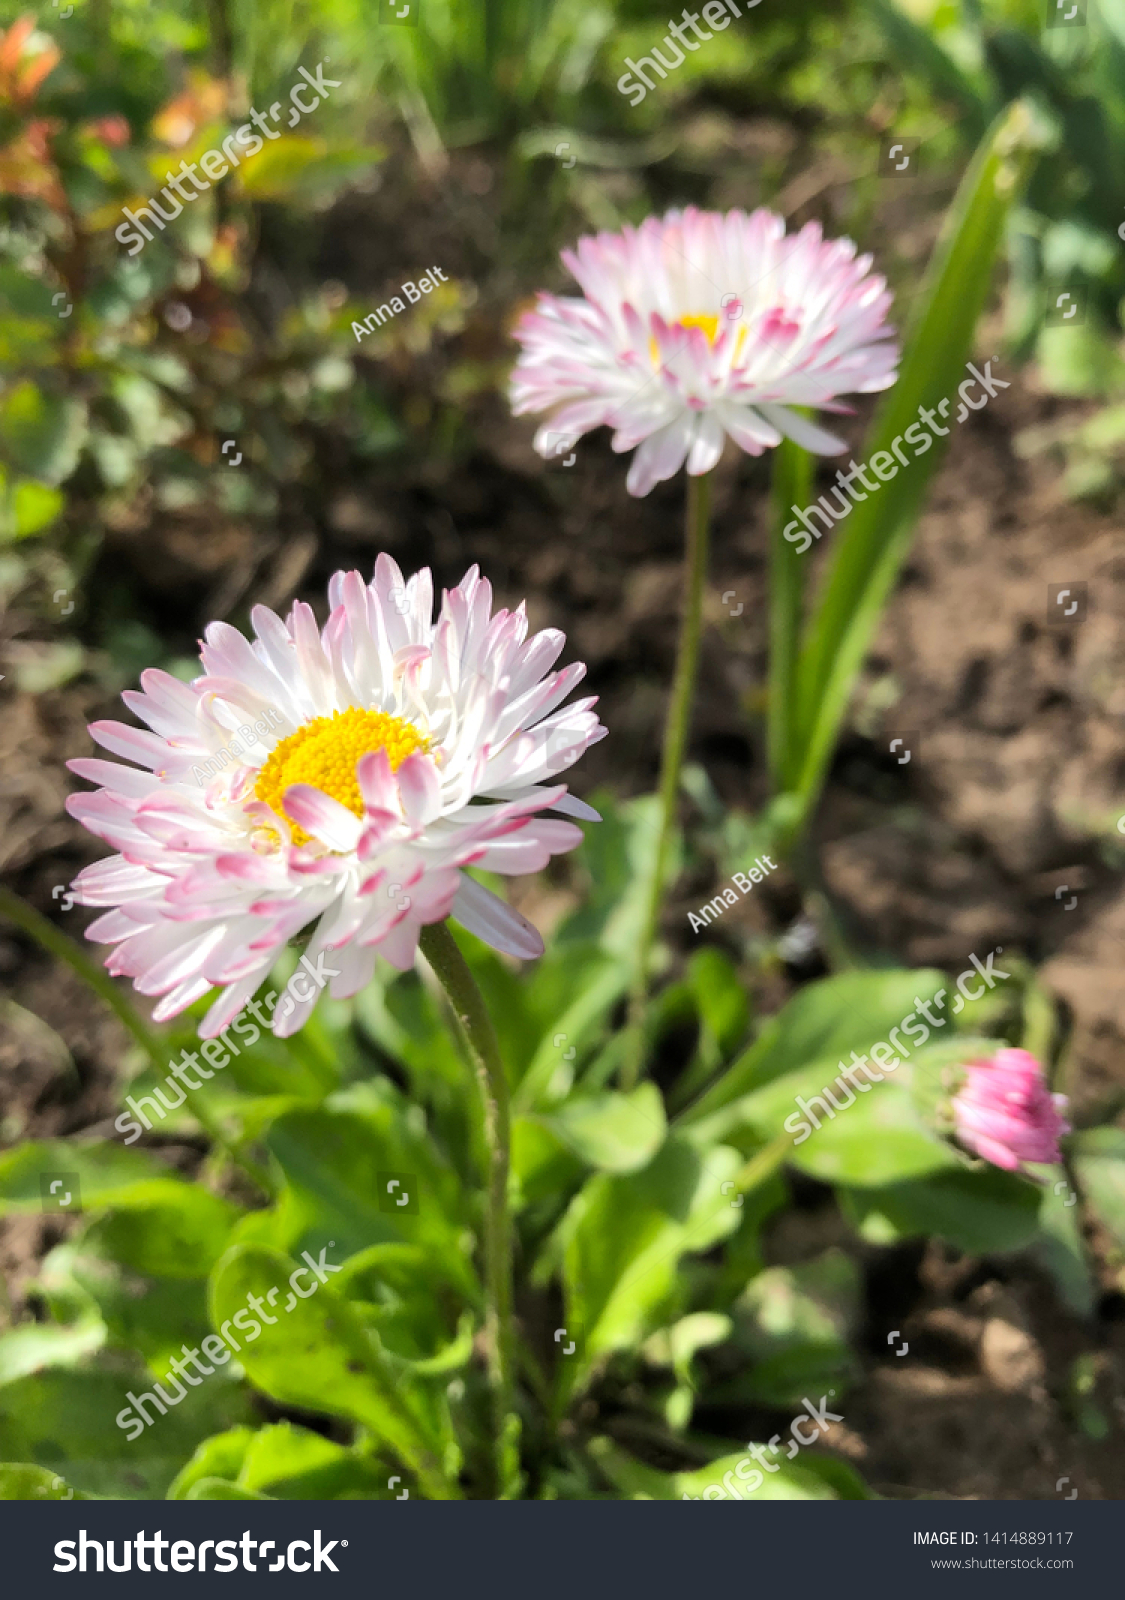 Flowering of daisies.  Gardening concept.  European species of daisy, of the Asteraceae family, sometimes called common daisy, lawn daisy or English daisy #1414889117